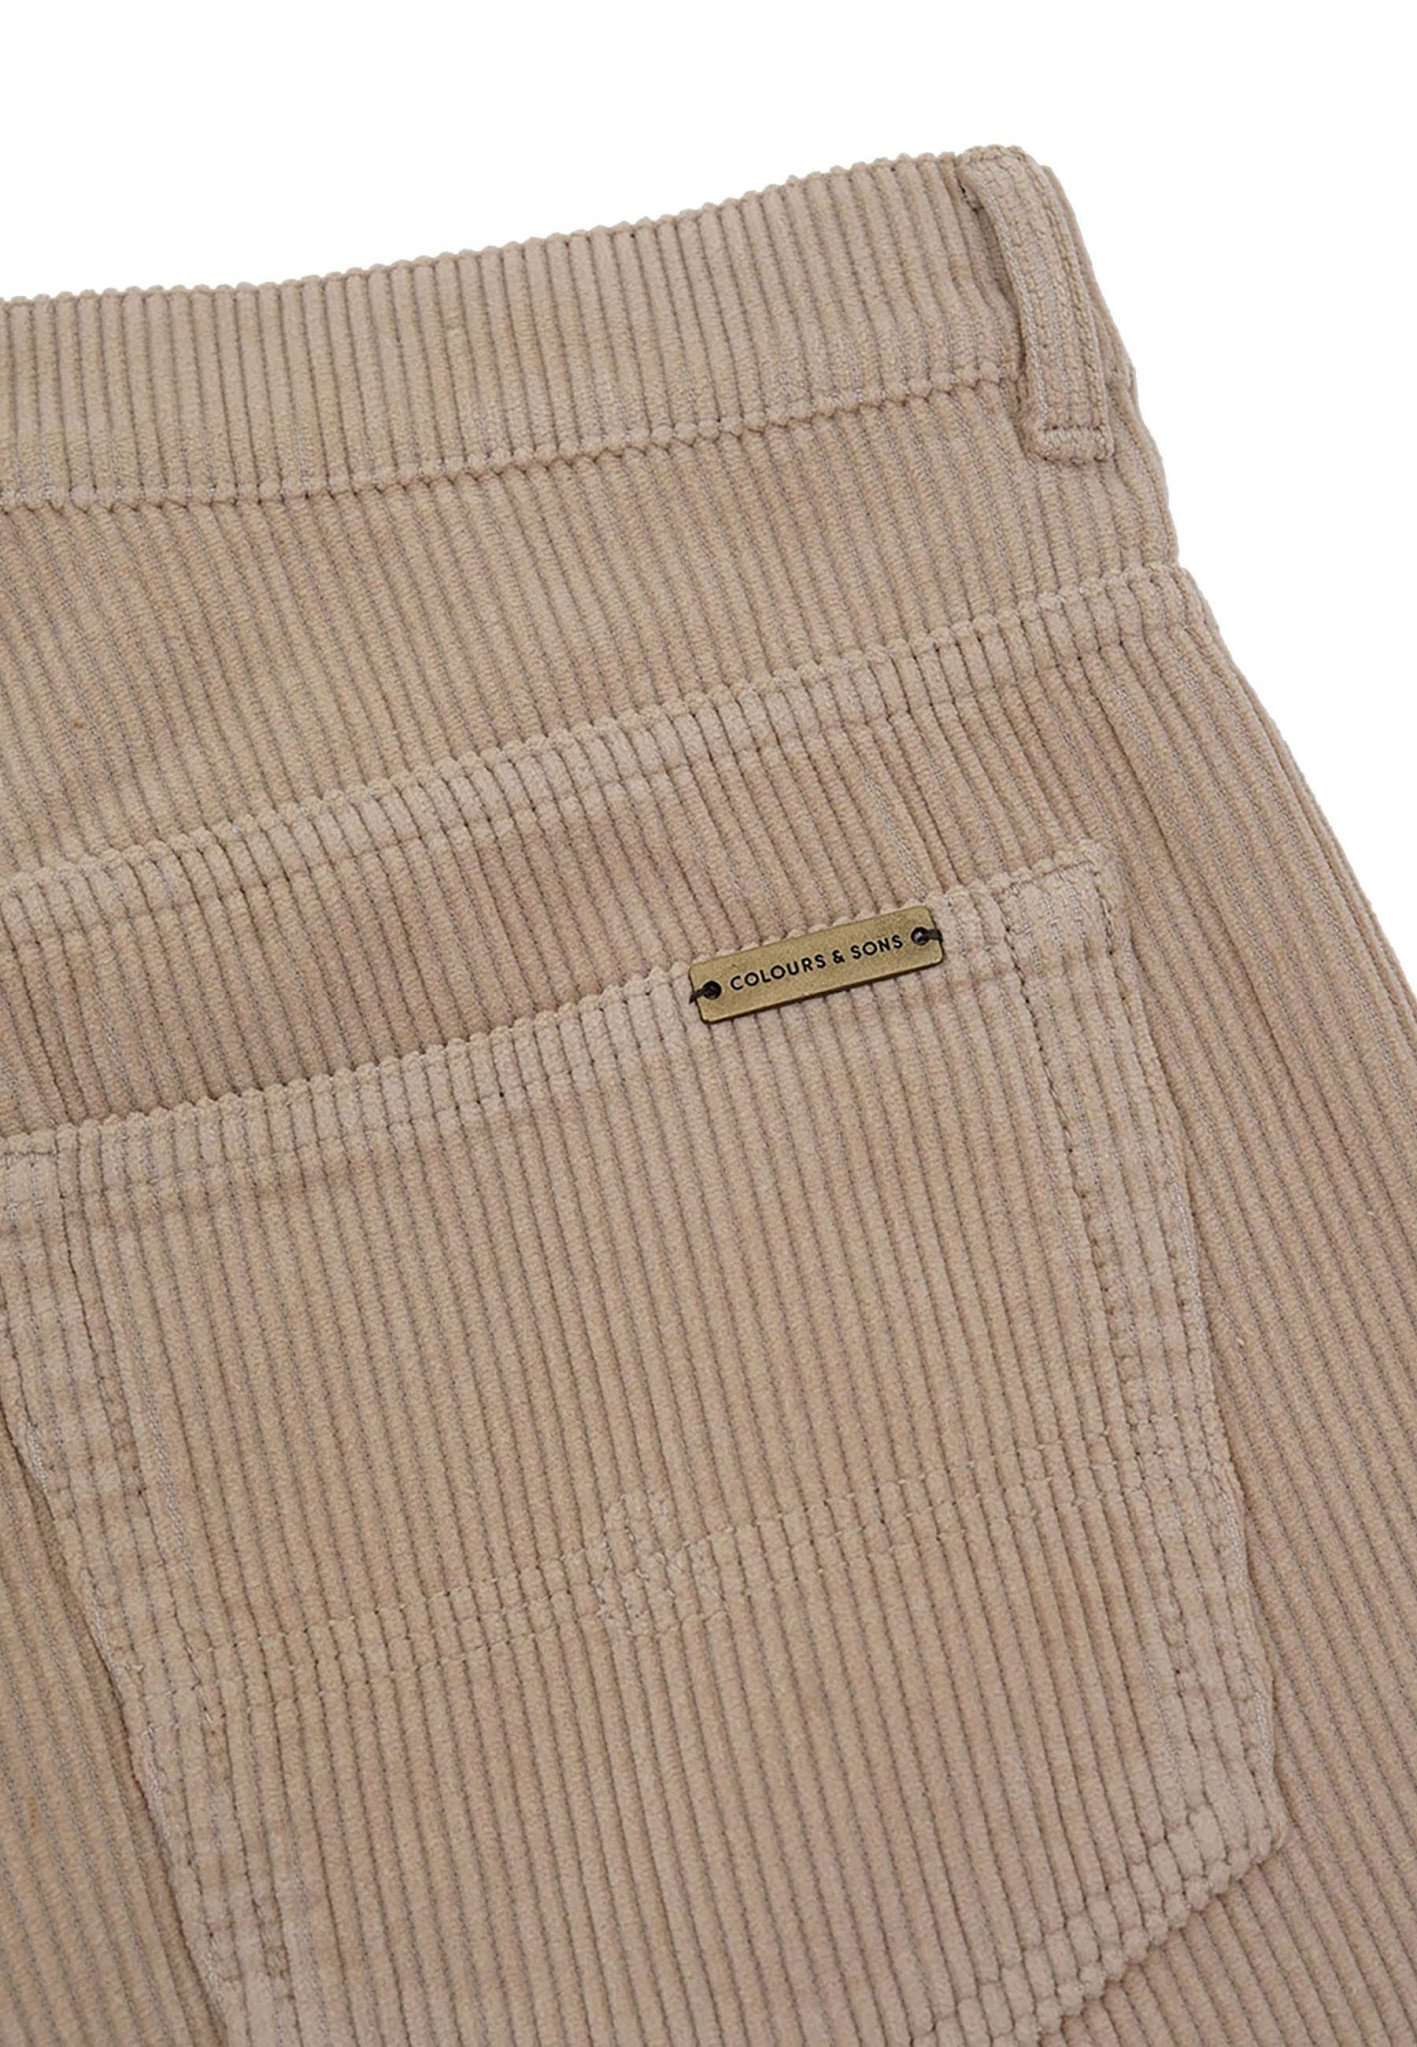 Pants-Corduroy in Tent Hosen Colours and Sons   